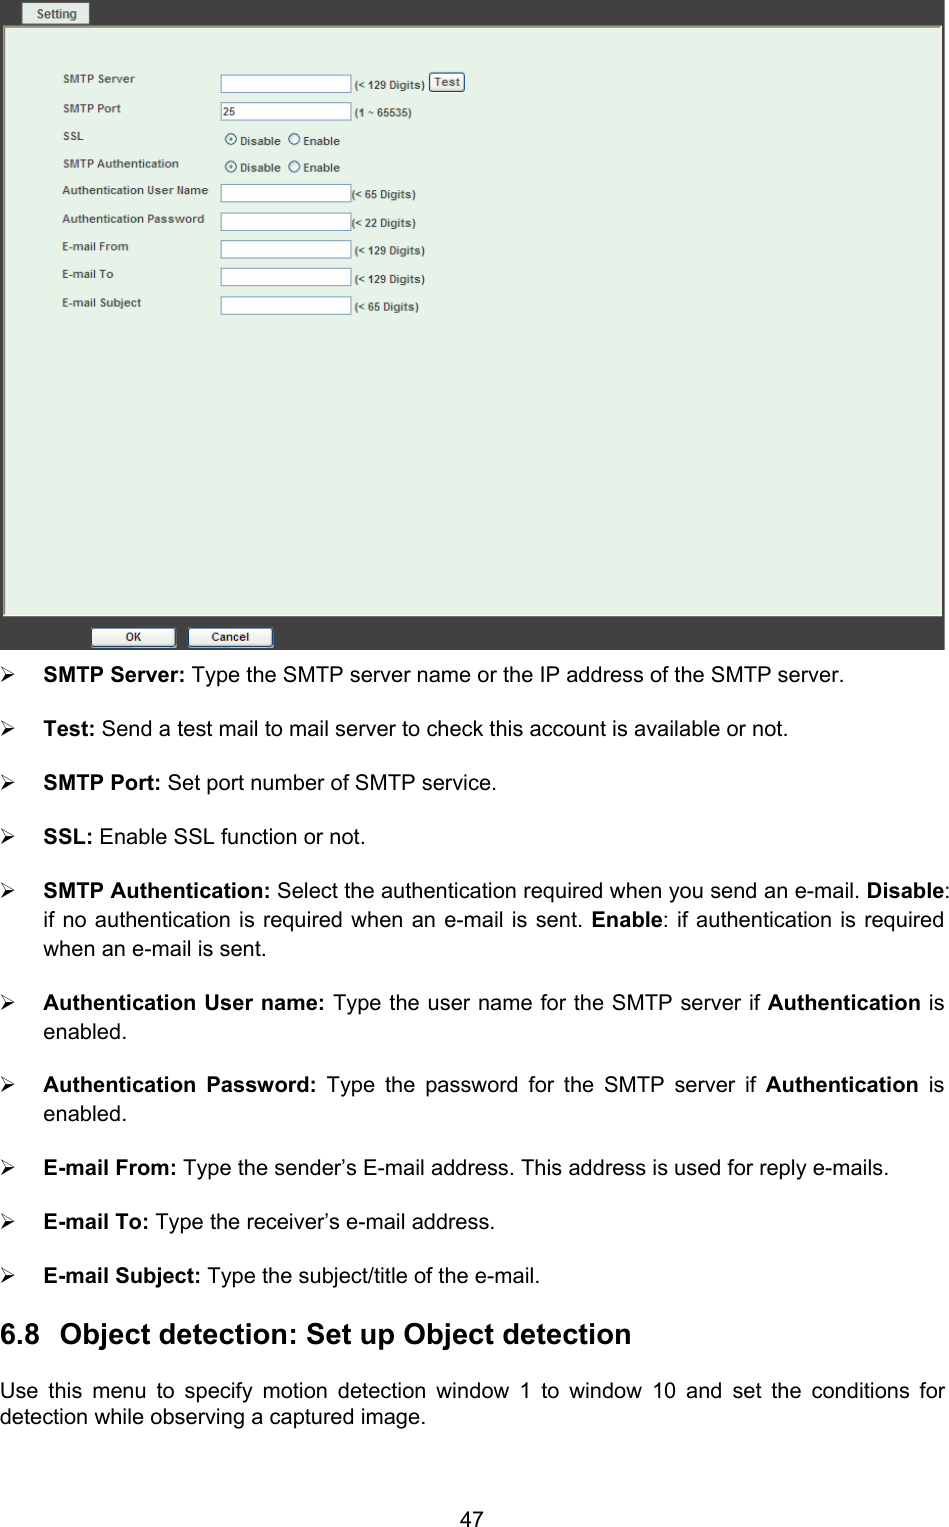  47  ¾ SMTP Server: Type the SMTP server name or the IP address of the SMTP server.   ¾ Test: Send a test mail to mail server to check this account is available or not.   ¾ SMTP Port: Set port number of SMTP service.   ¾ SSL: Enable SSL function or not.   ¾ SMTP Authentication: Select the authentication required when you send an e-mail. Disable: if no authentication is required when an e-mail is sent. Enable: if authentication is required when an e-mail is sent.   ¾ Authentication User name: Type the user name for the SMTP server if Authentication is enabled.  ¾ Authentication Password: Type the password for the SMTP server if Authentication is enabled.  ¾ E-mail From: Type the sender’s E-mail address. This address is used for reply e-mails. ¾ E-mail To: Type the receiver’s e-mail address.   ¾ E-mail Subject: Type the subject/title of the e-mail. 6.8  Object detection: Set up Object detection   Use this menu to specify motion detection window 1 to window 10 and set the conditions for detection while observing a captured image. 